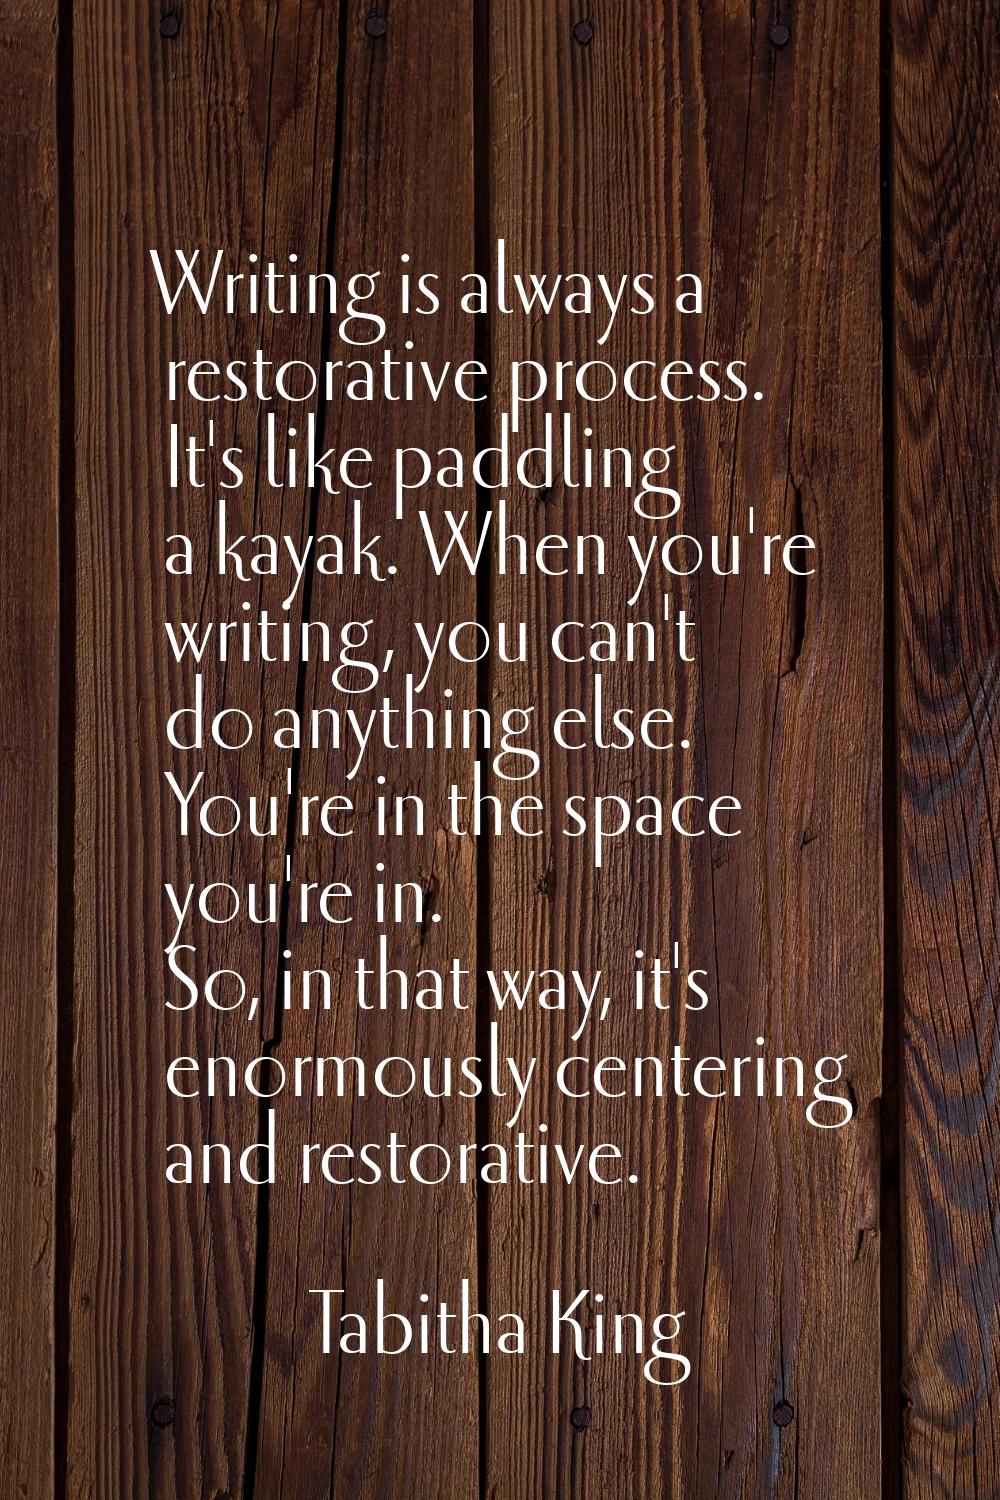 Writing is always a restorative process. It's like paddling a kayak. When you're writing, you can't